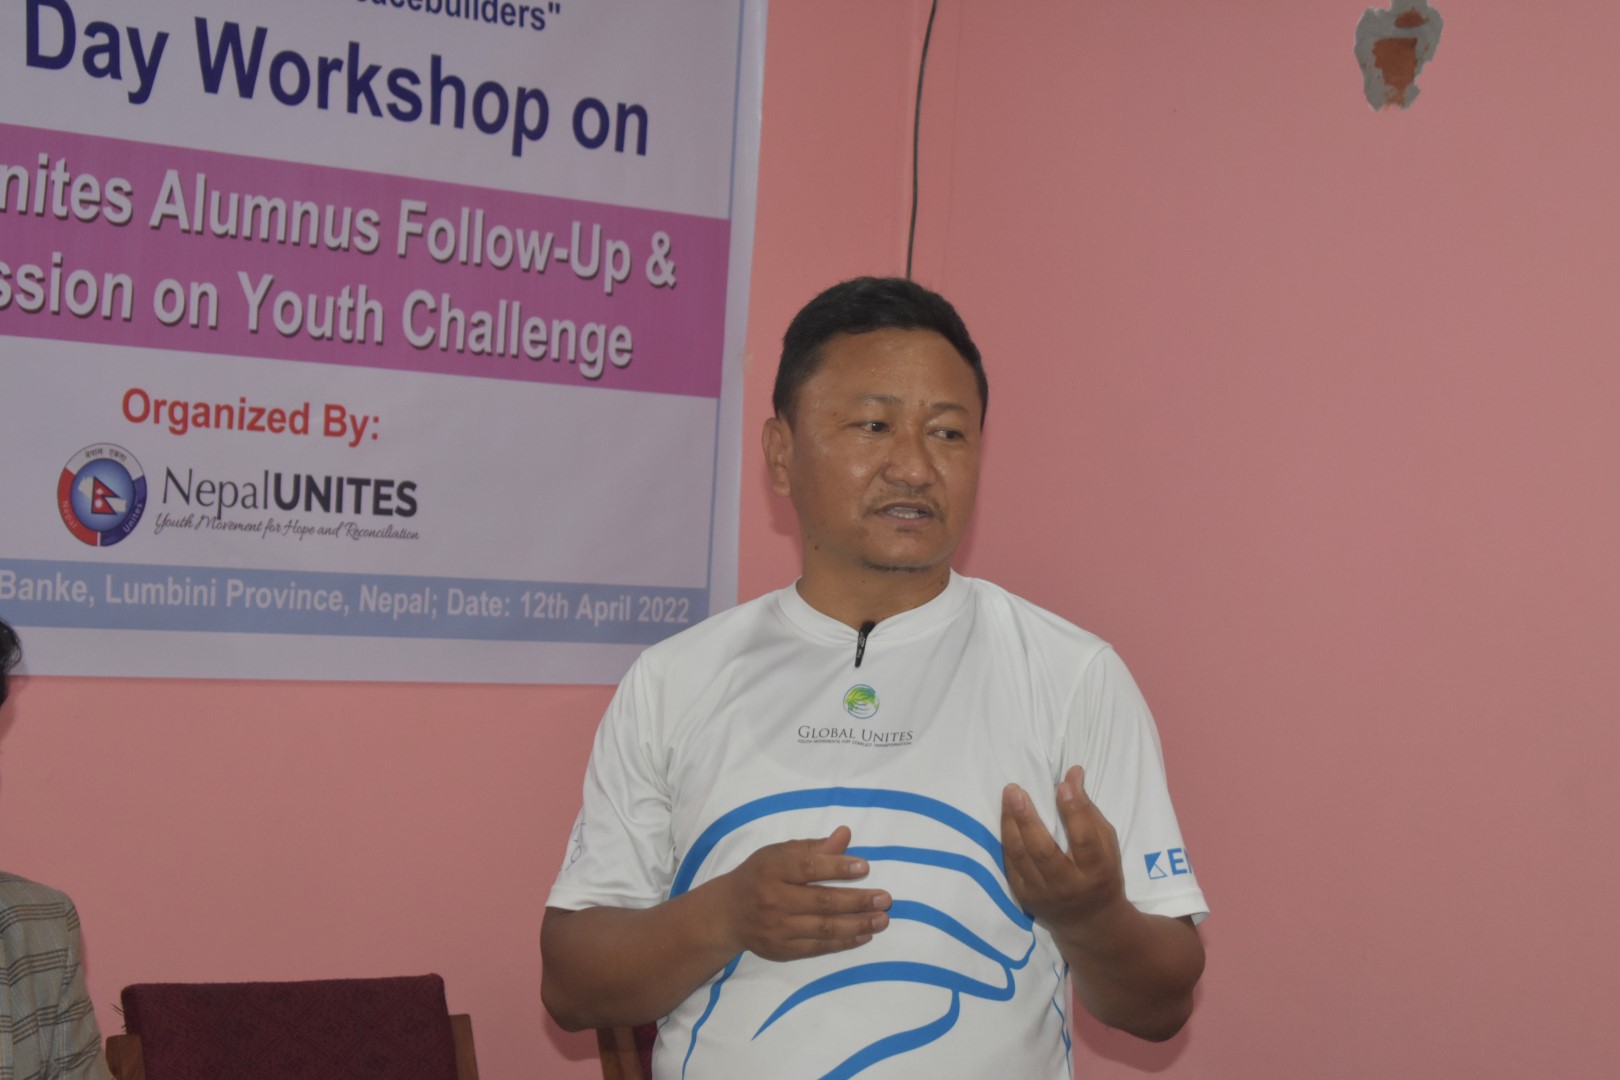 NU Alumnus Follow-Up Workshop & Discussion on Youth Challenge